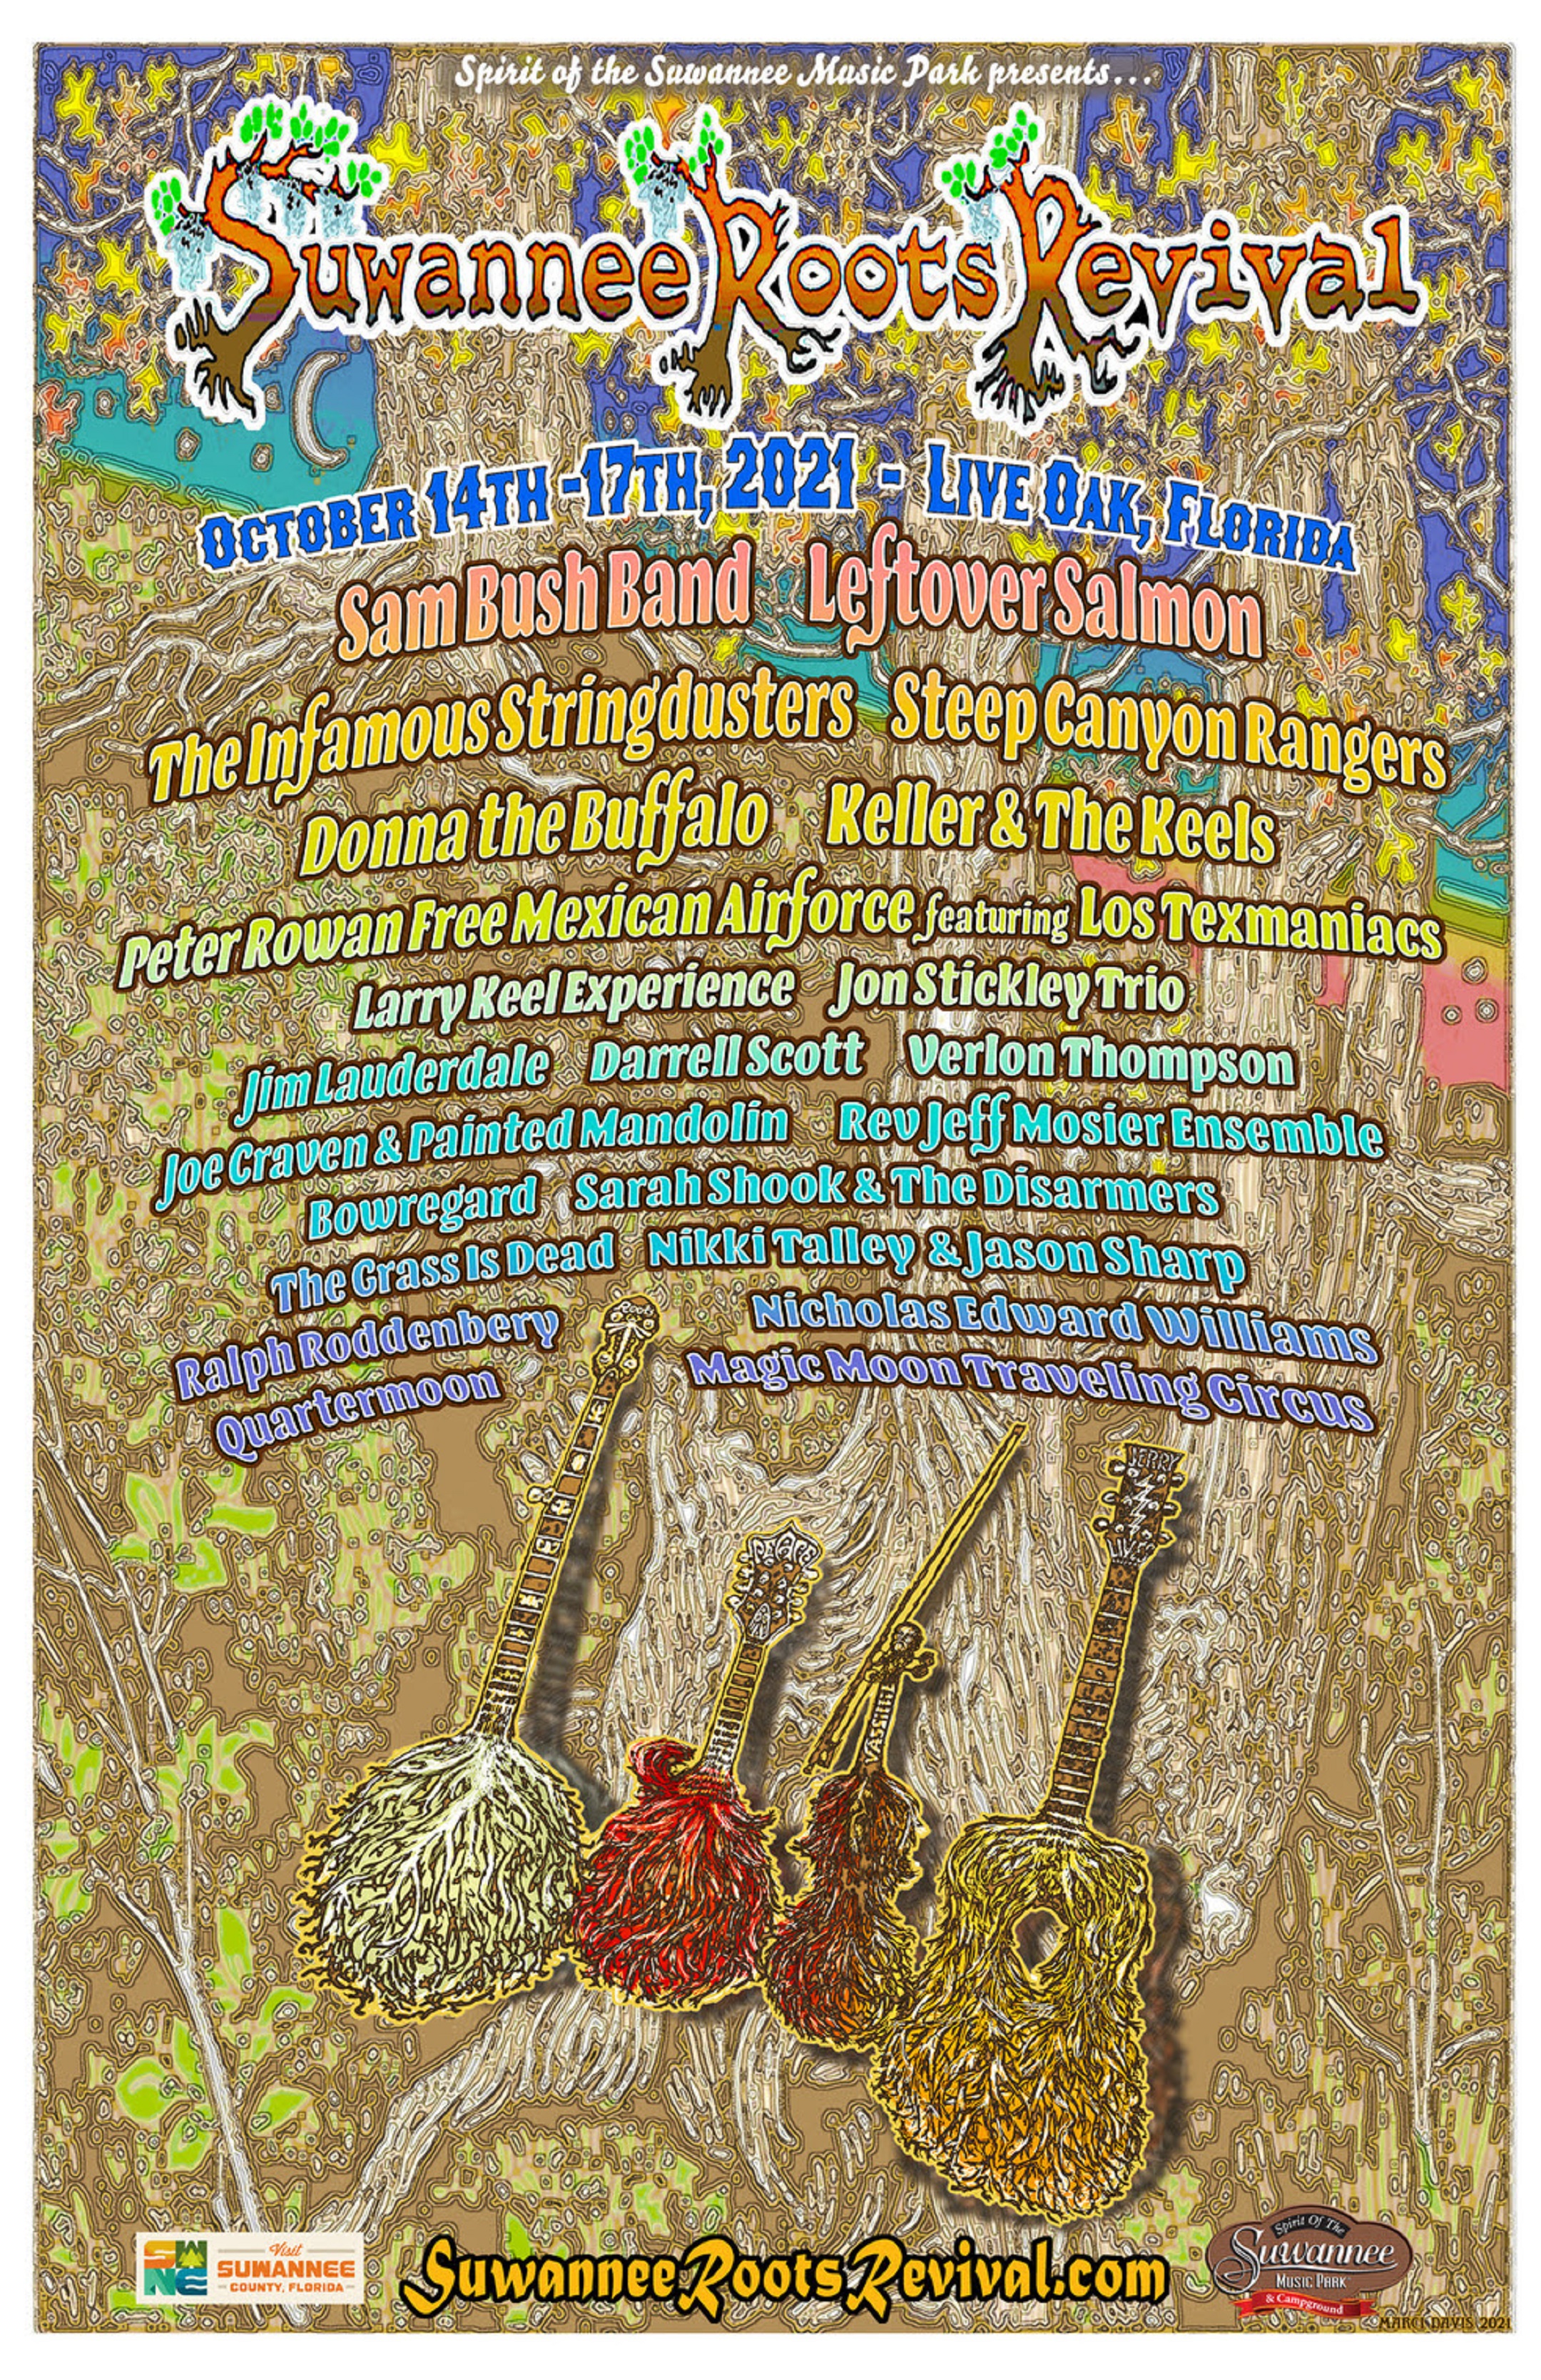 Suwannee Roots Revival 2021 Schedule Announced!